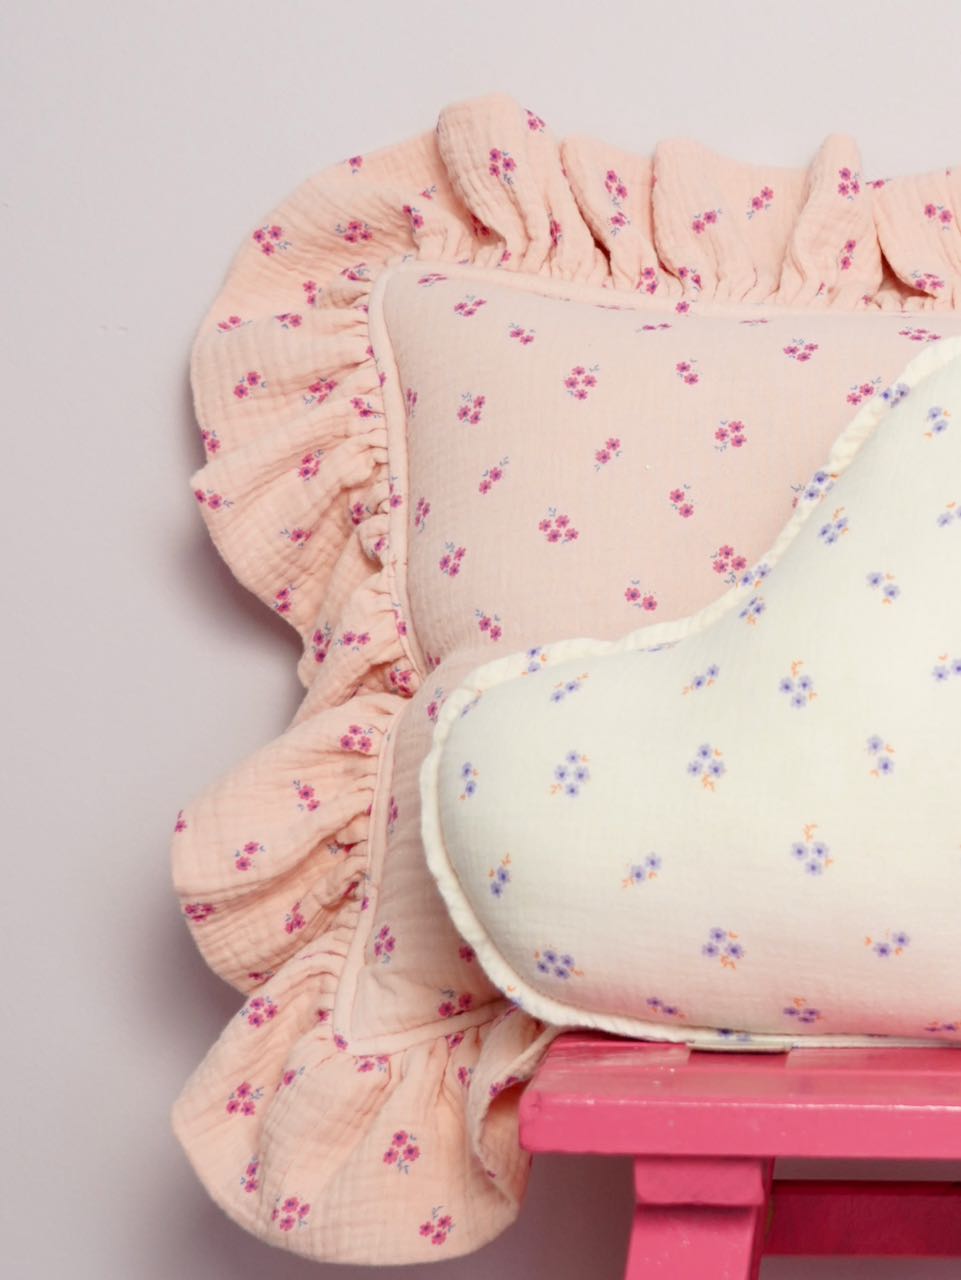 "Pink forget-me-not" Muslin Pillow with Frill